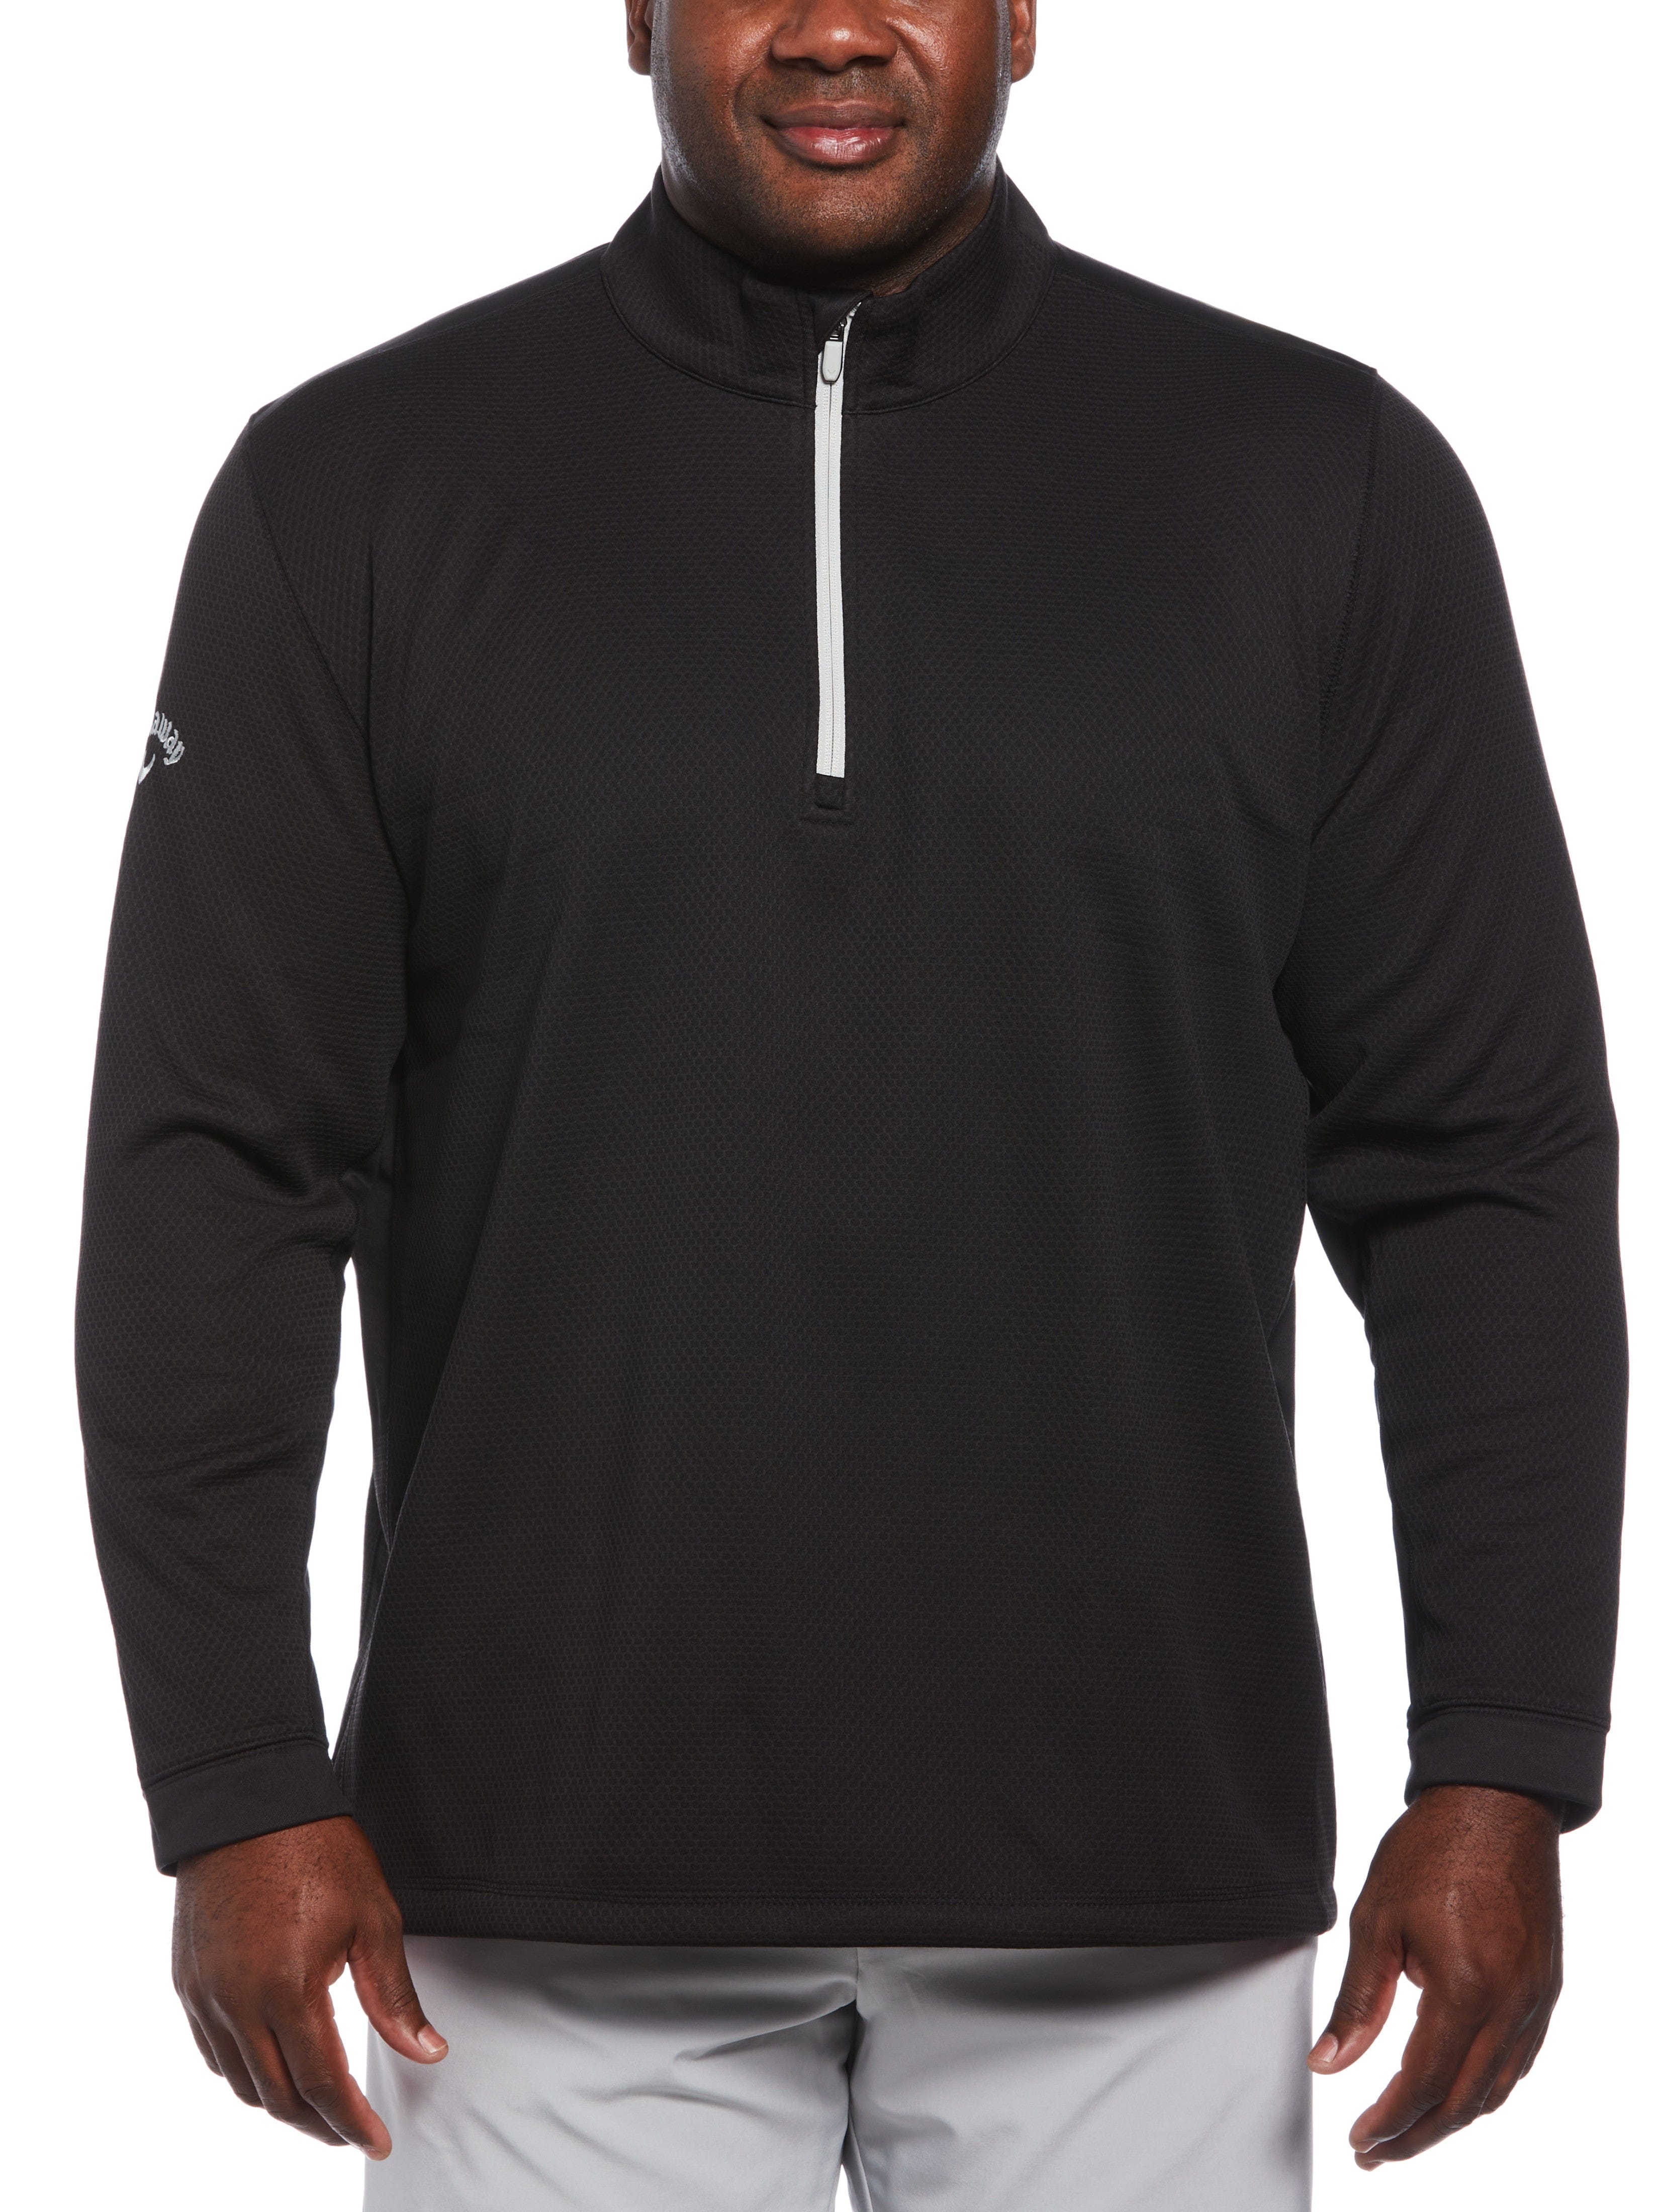 Men's Big & Tall Premium Washed Fleece Hoodie - All in Motion Black 3XL